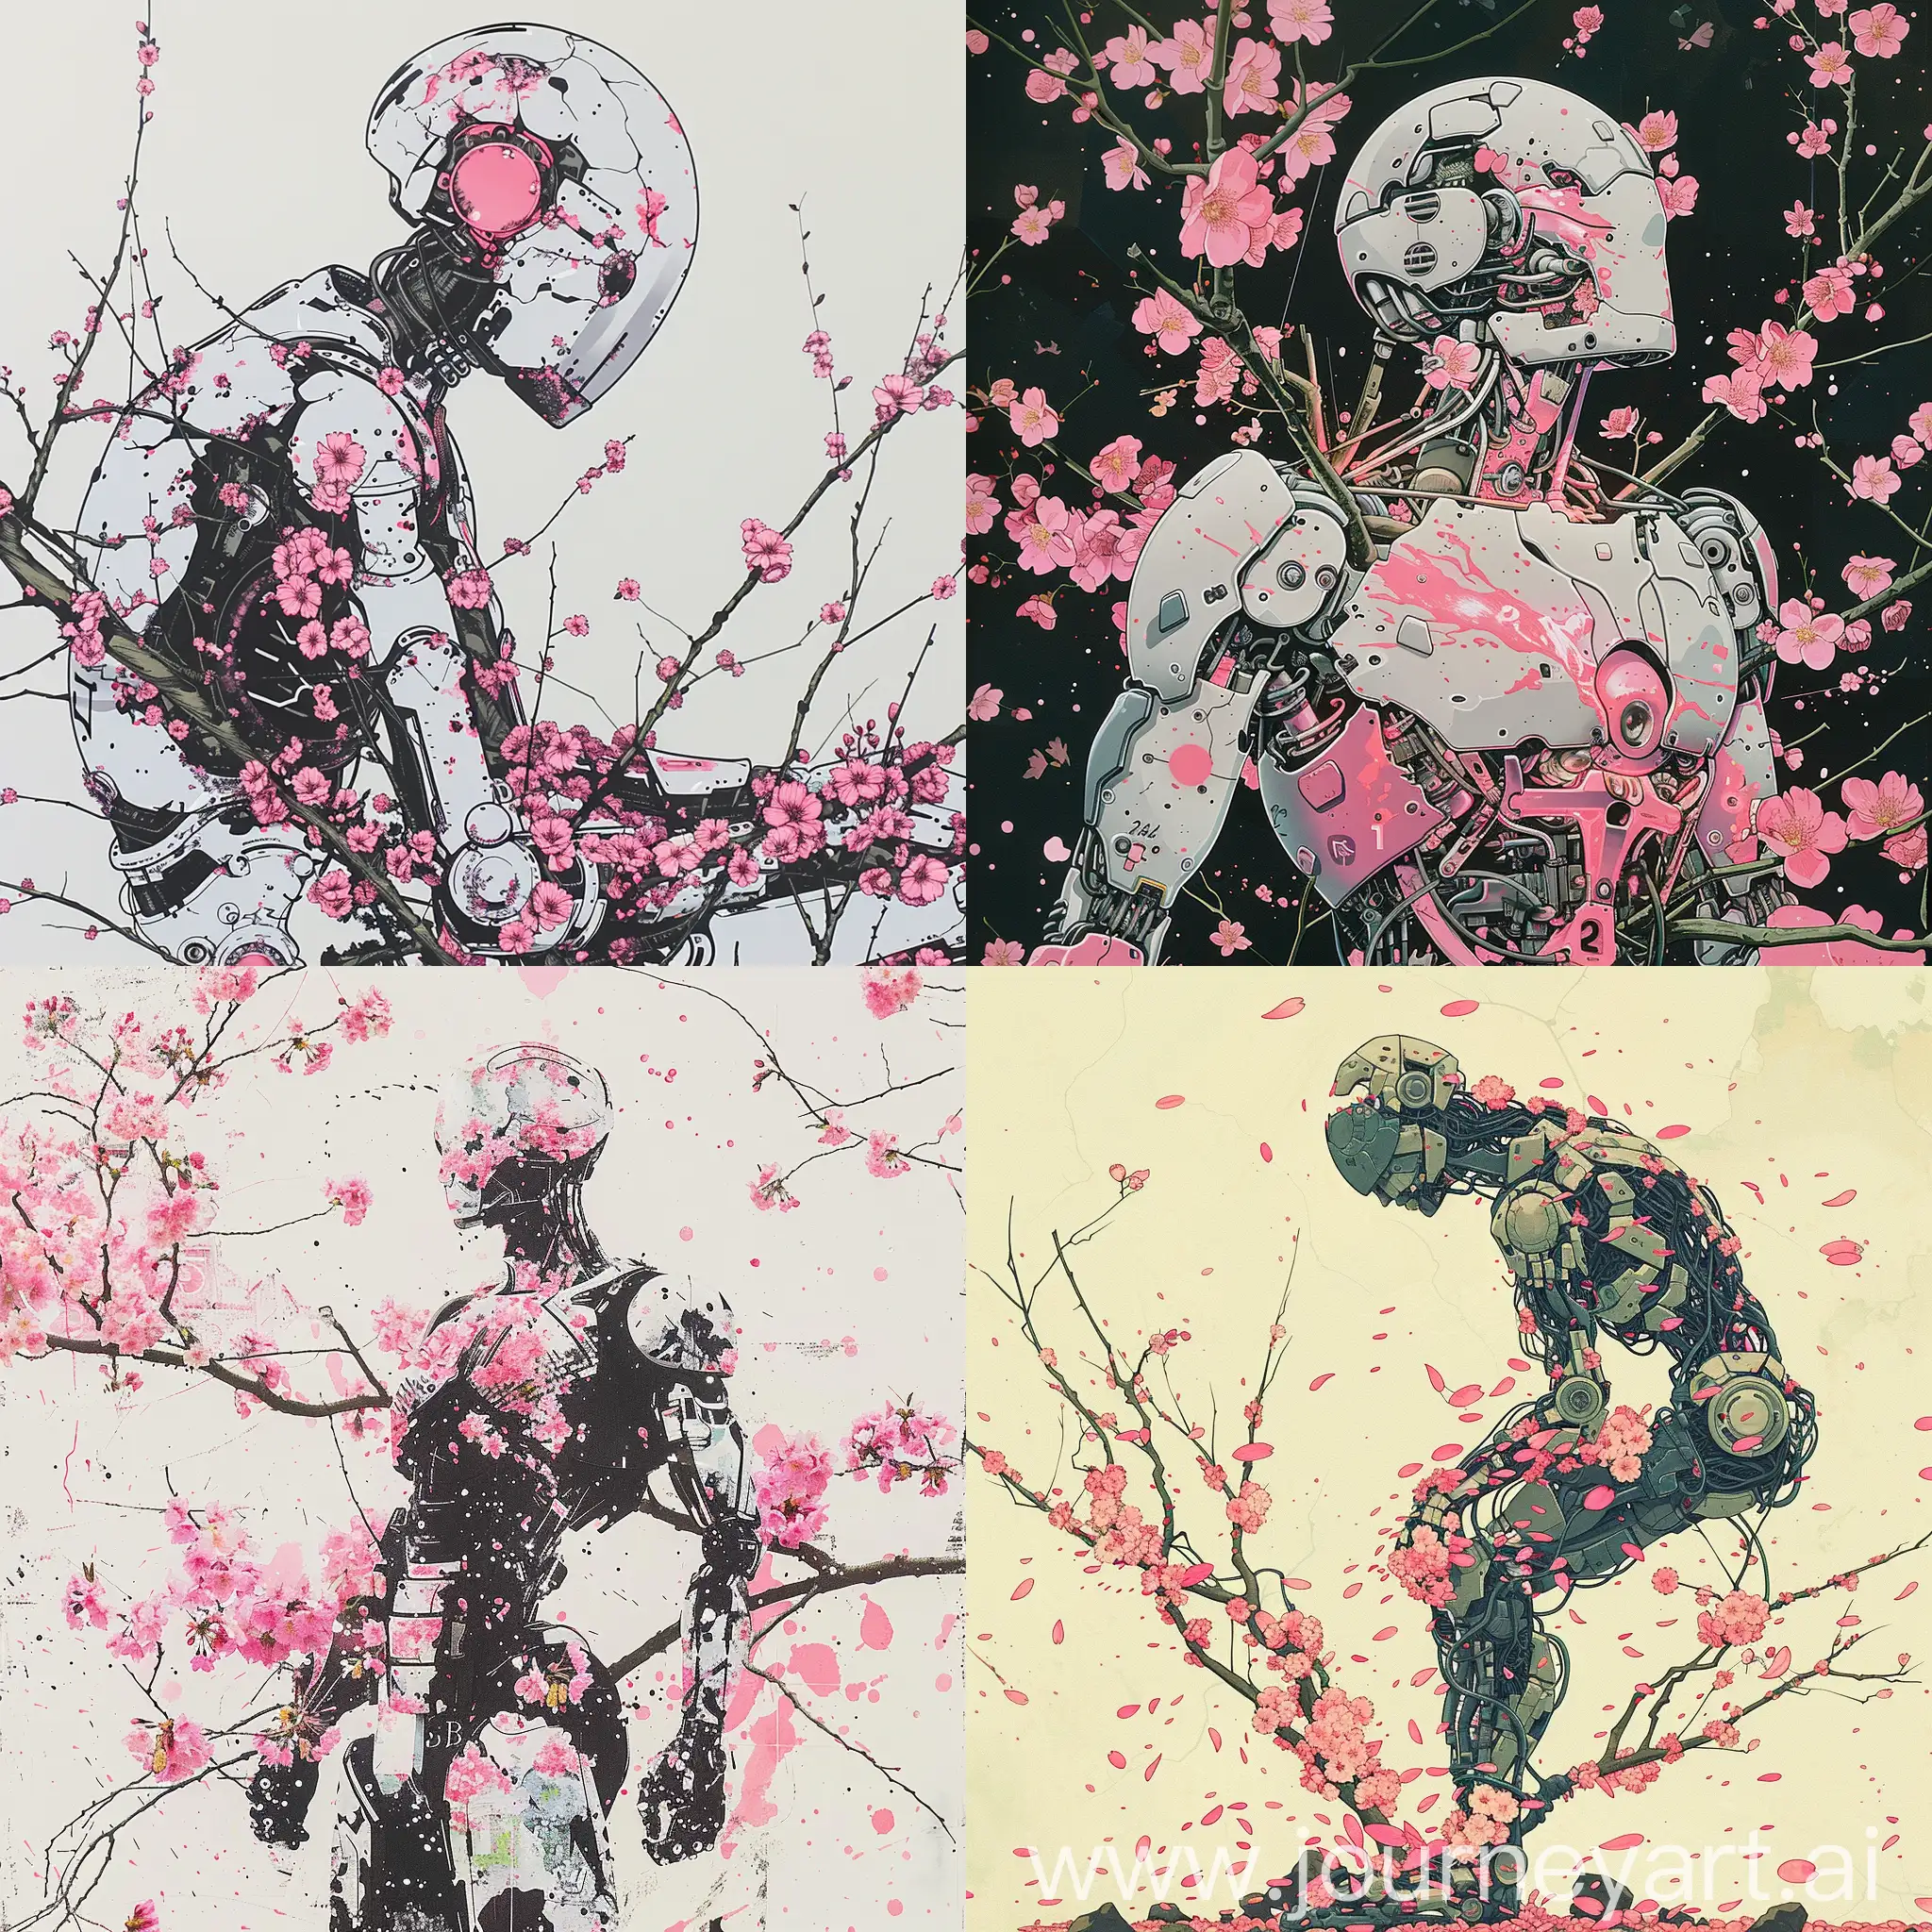 2b from nier, 2b, pop art, Repetition, trick, Meticulous, Graffiti Art, Painstaking, broken ink, spring theme, pink flowers, whole body, fluorescence color, Proportion, Block Printing, cherry-blossom, dynamic posture, three point perspective, dense background, best quality, 2b from nier, 2b, The ultimate masterpiece, absurdity and stunning illustrations, intricate backgrounds, nier automata